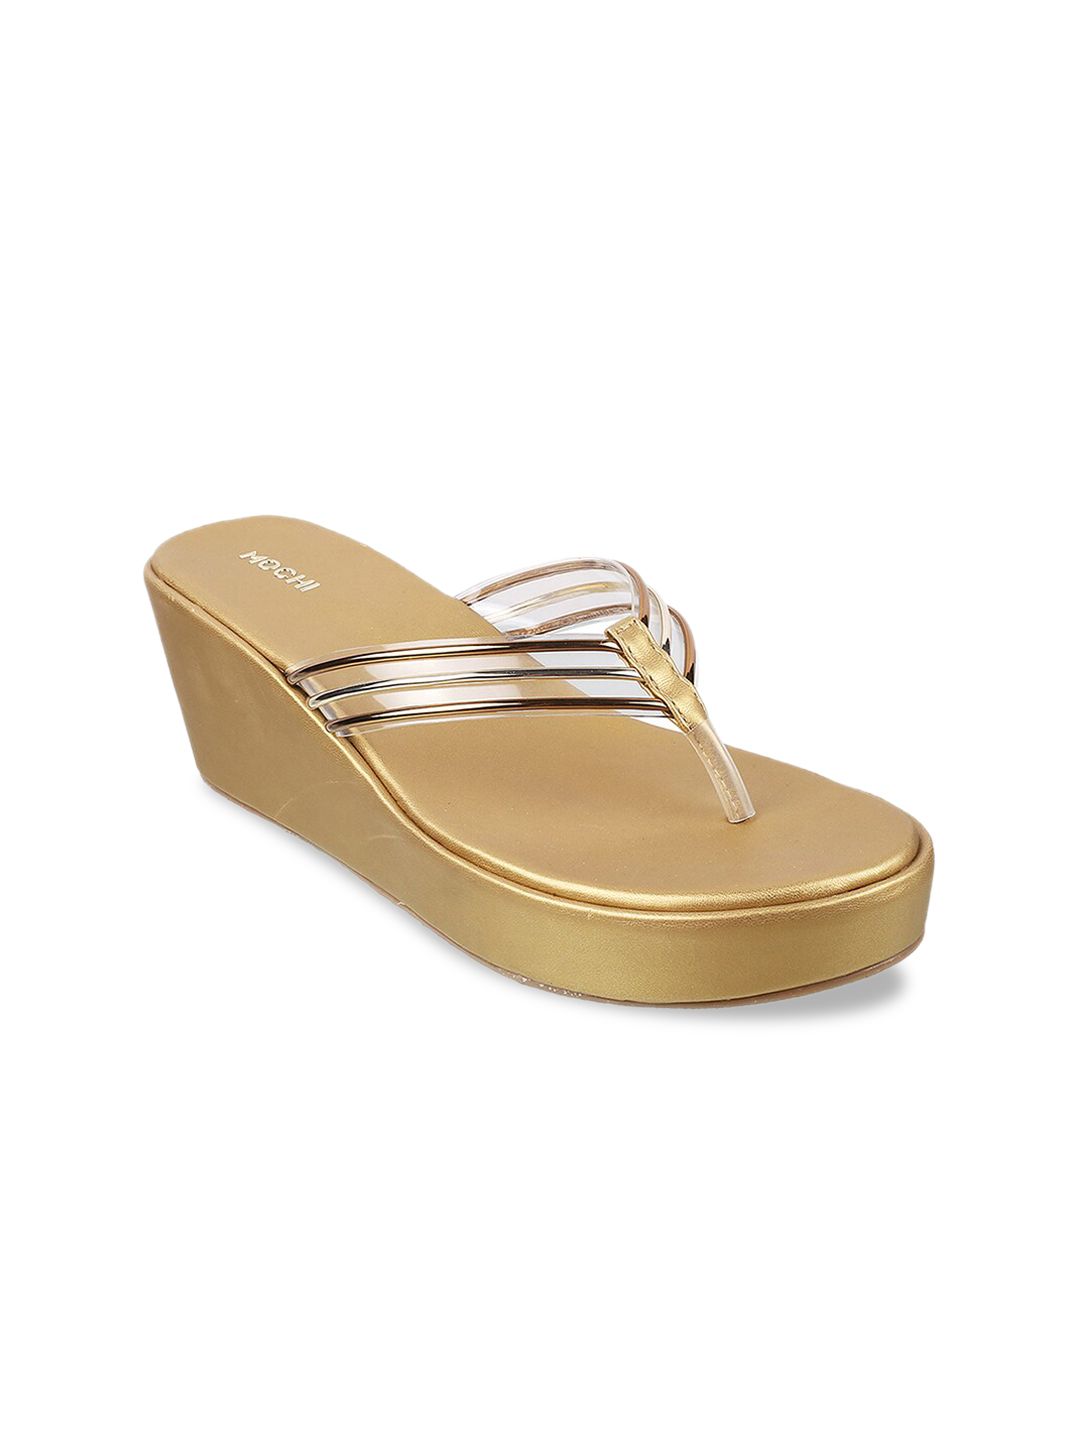 Mochi Gold-Toned Wedge Sandals Price in India